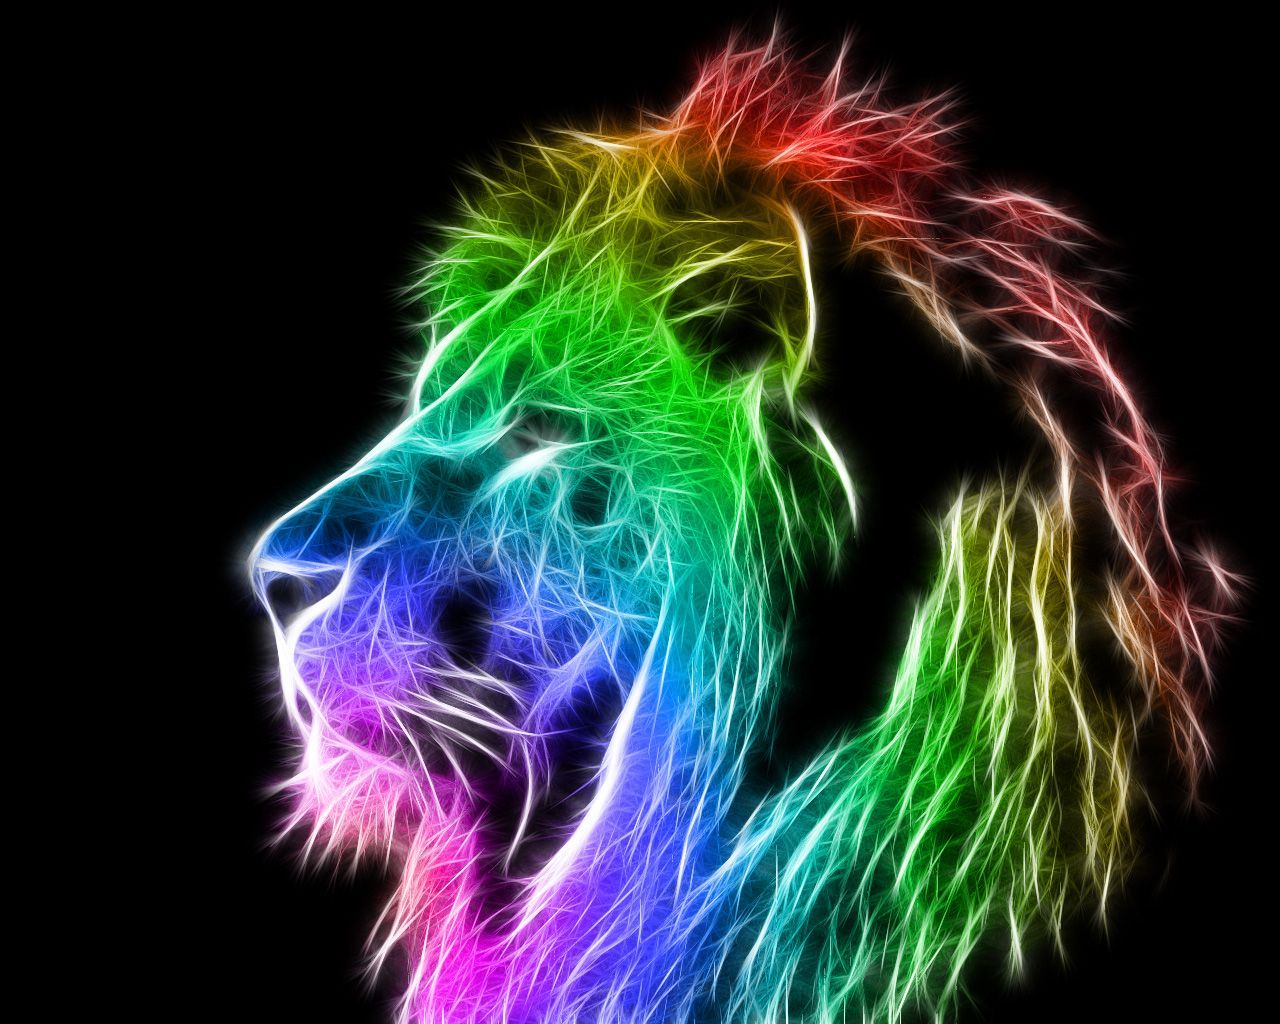 Lion Wallpaper Stock Photos and Images - 123RF